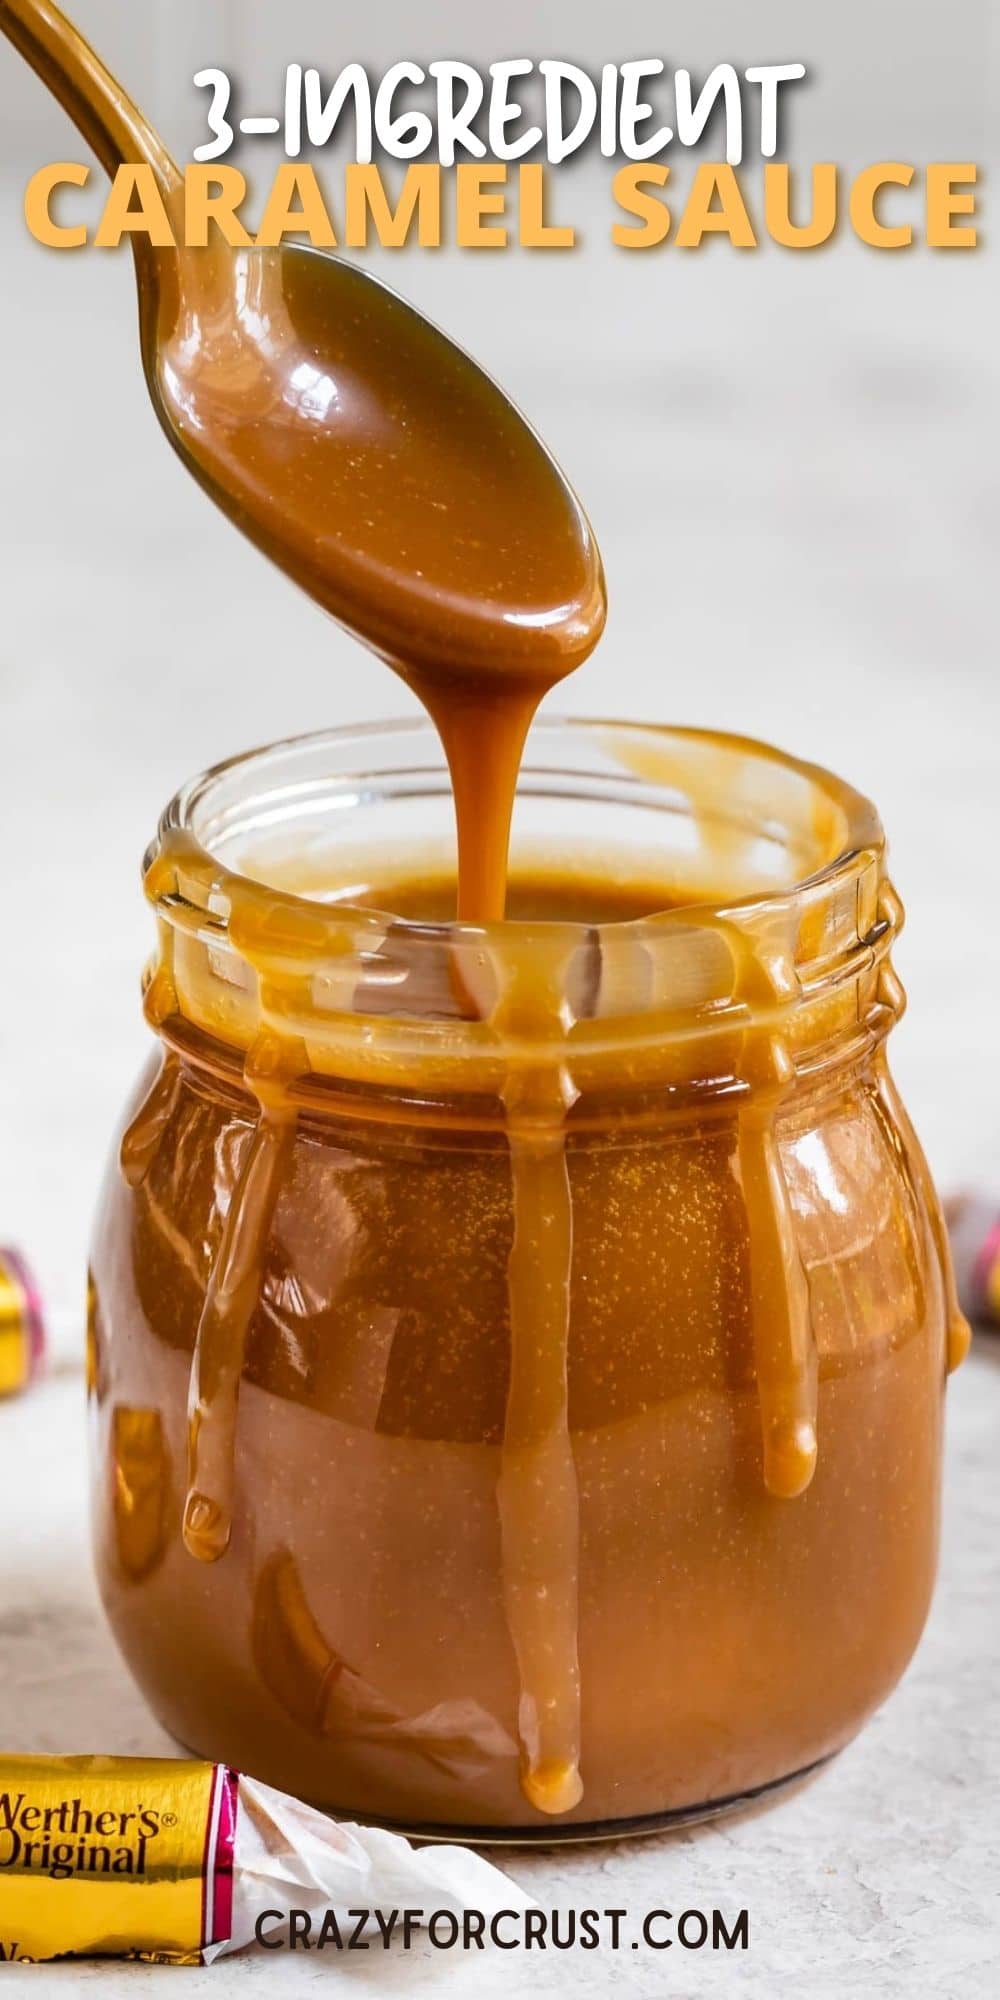 Spoonful of three-ingredient caramel sauce being poured back into the small jar with recipe title on top of image